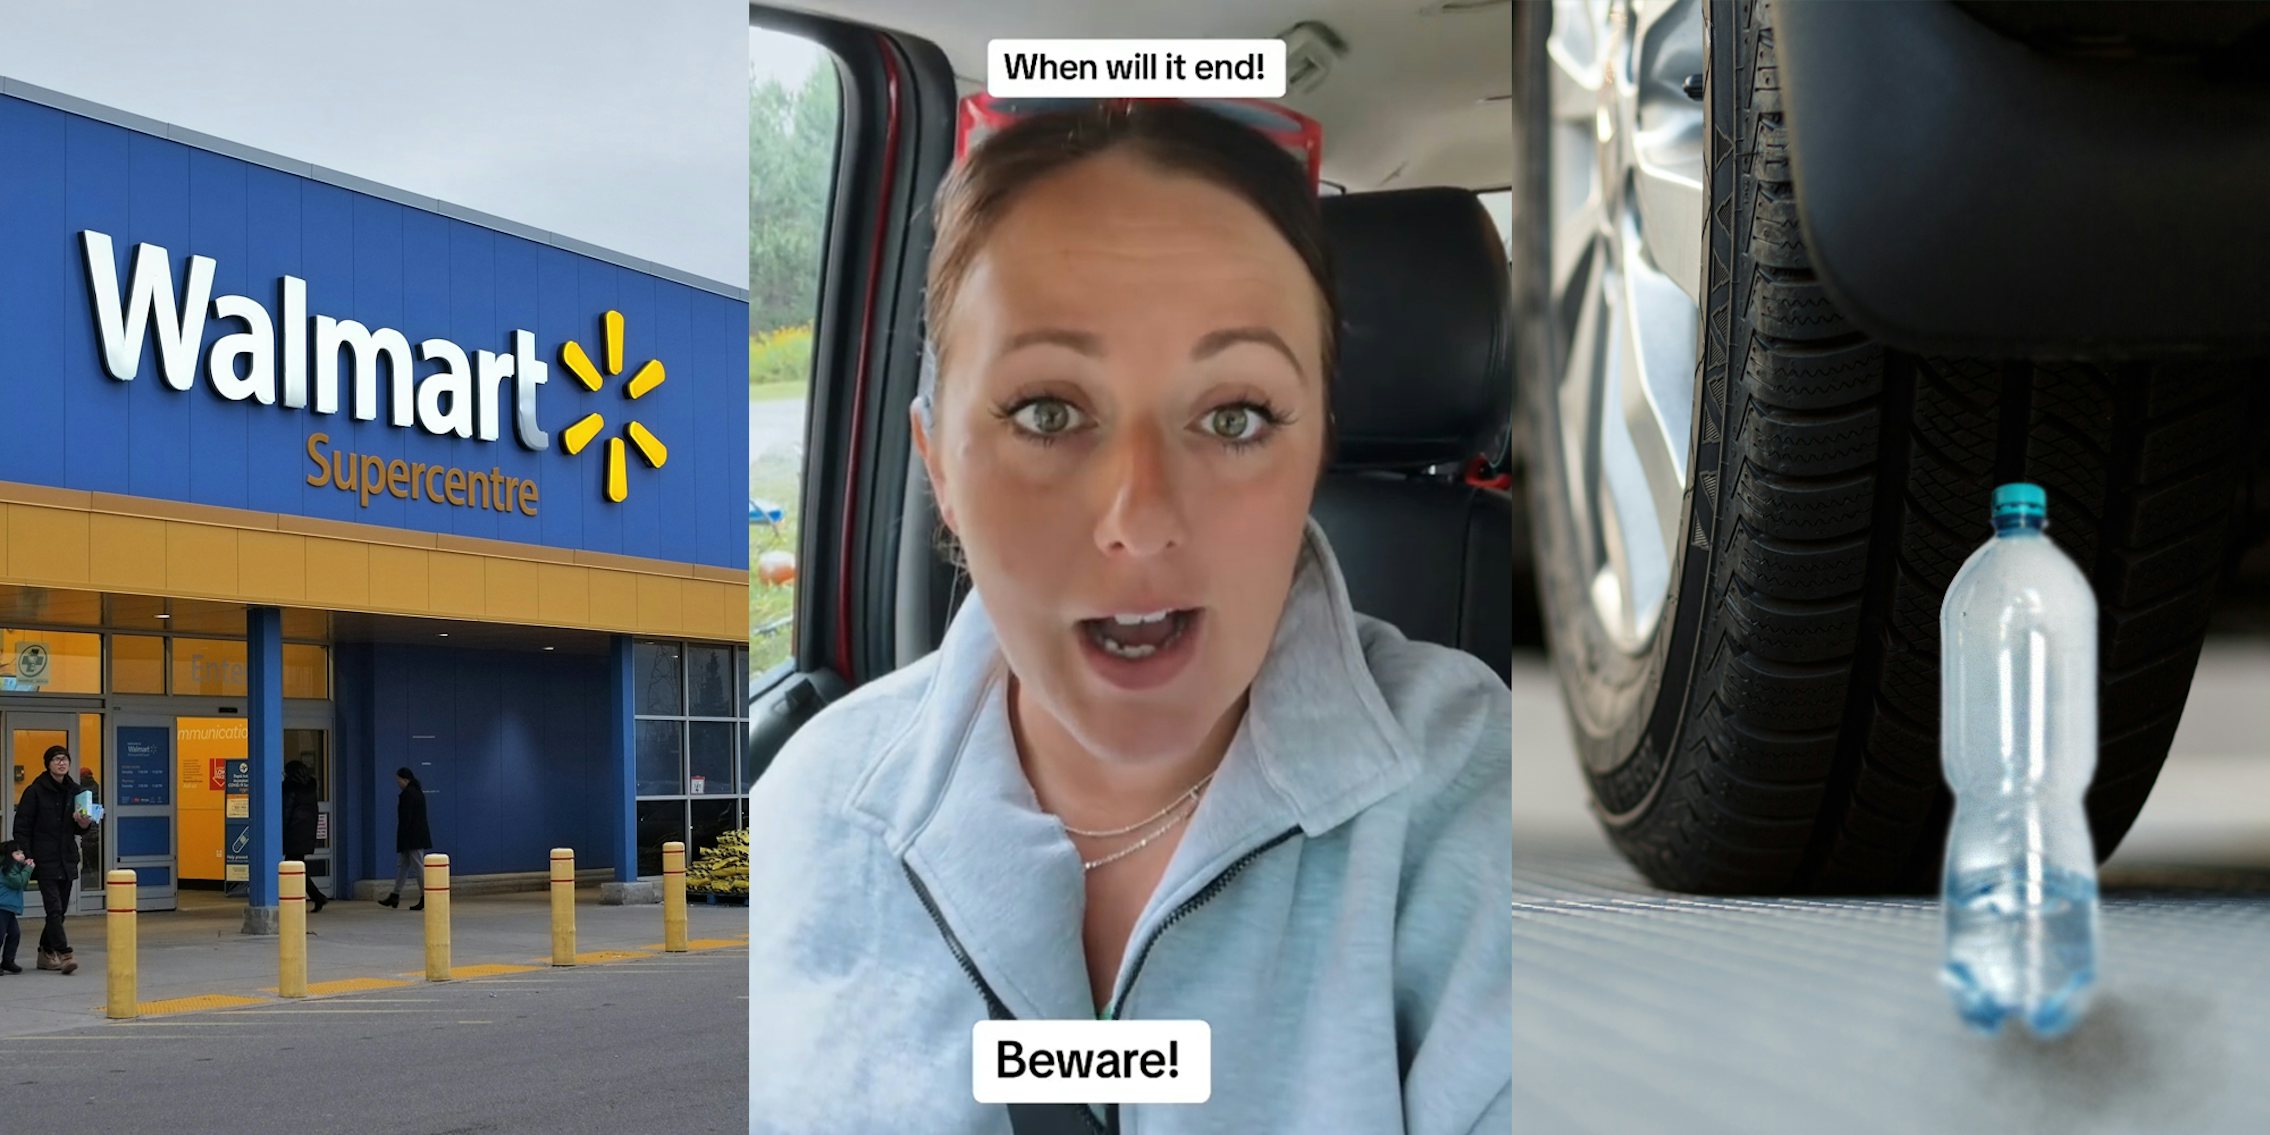 Walmart building with sign (c) woman speaking in car with caption 'When will it end! Beware!' (c) water bottle behind car tire (r)